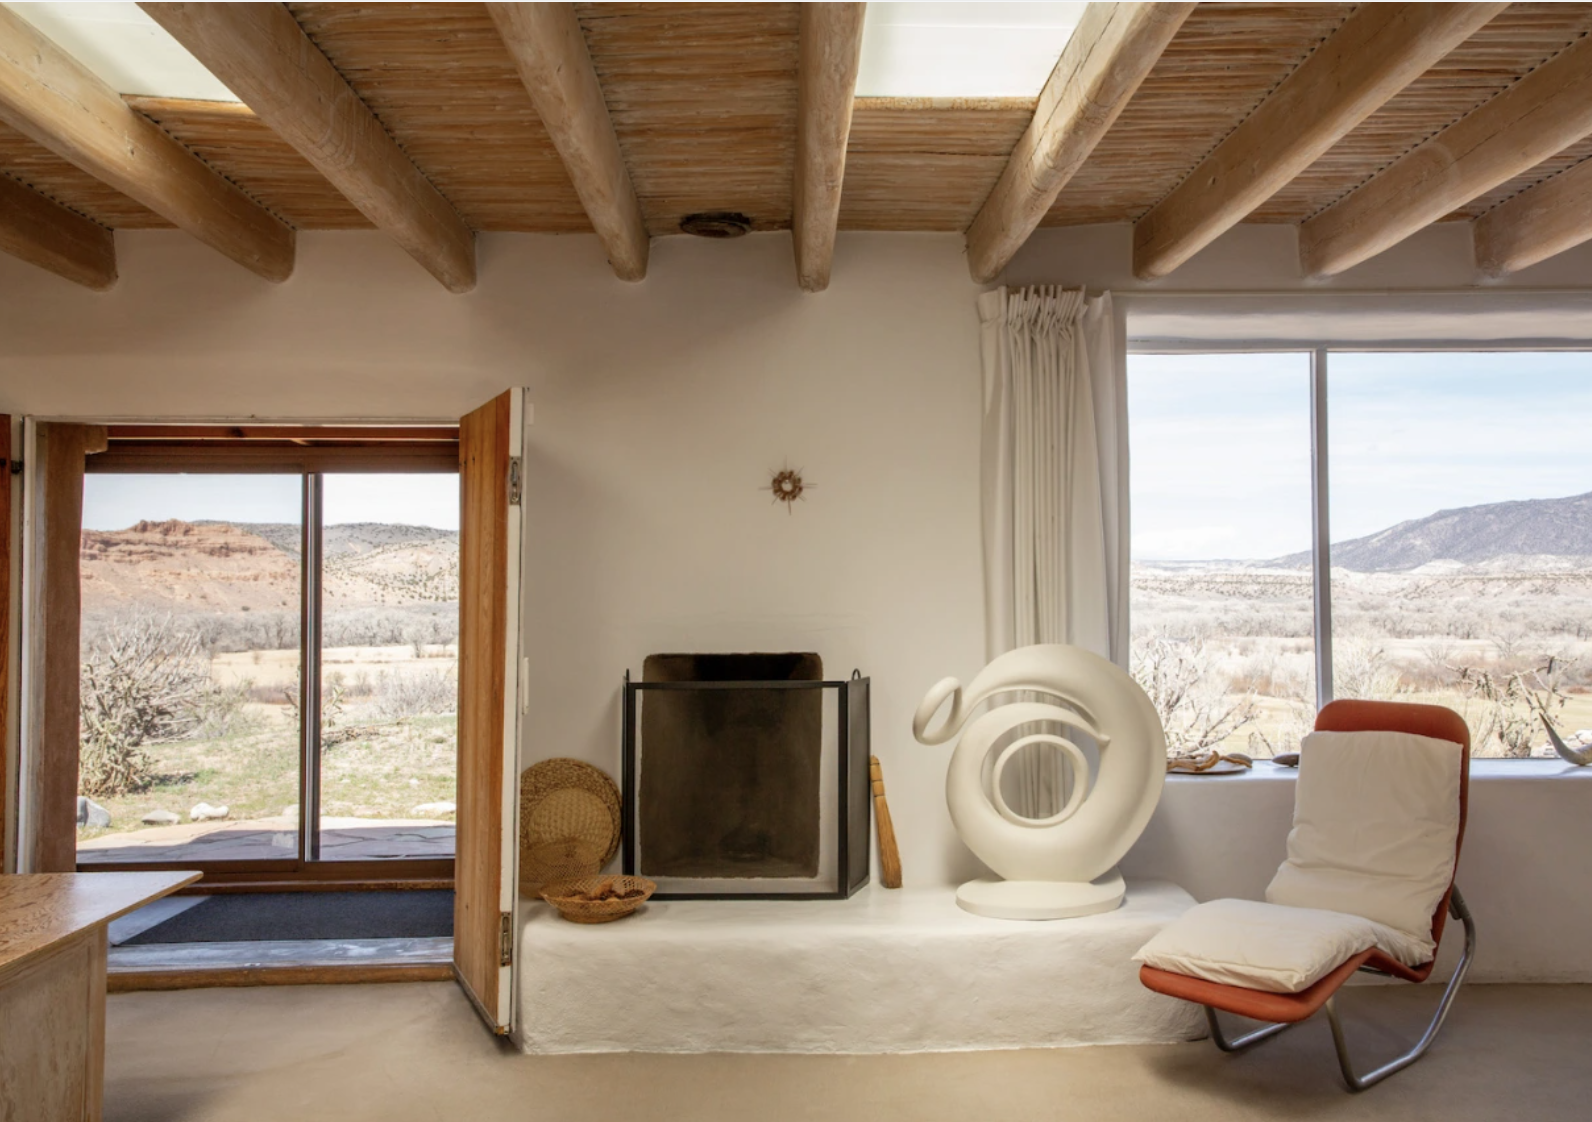 A photograph shows an interior of a room overlooking the New Mexican desert. The room is in beige tones and has a wood ceiling. Through big windows, plains and a mountain are visible in the distance. The color palette inside resembles the colors outside.